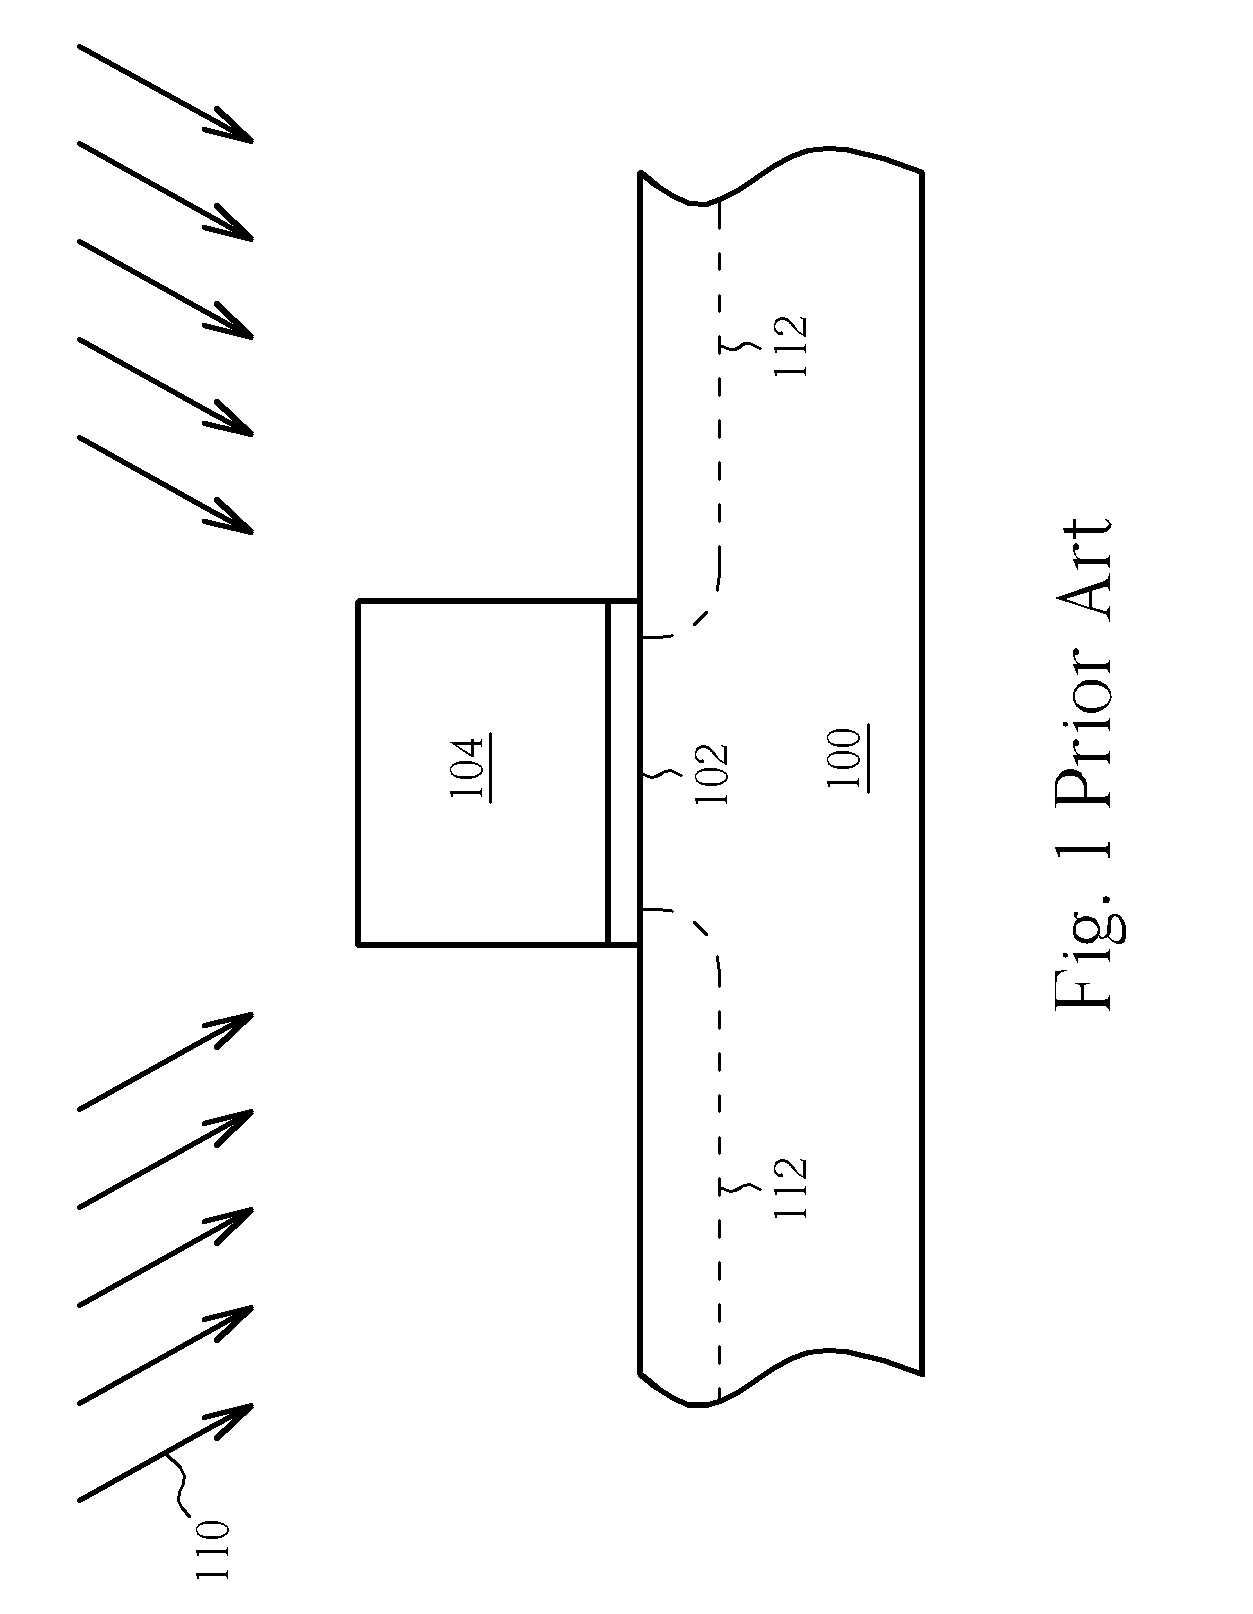 Method for forming MOS transistor